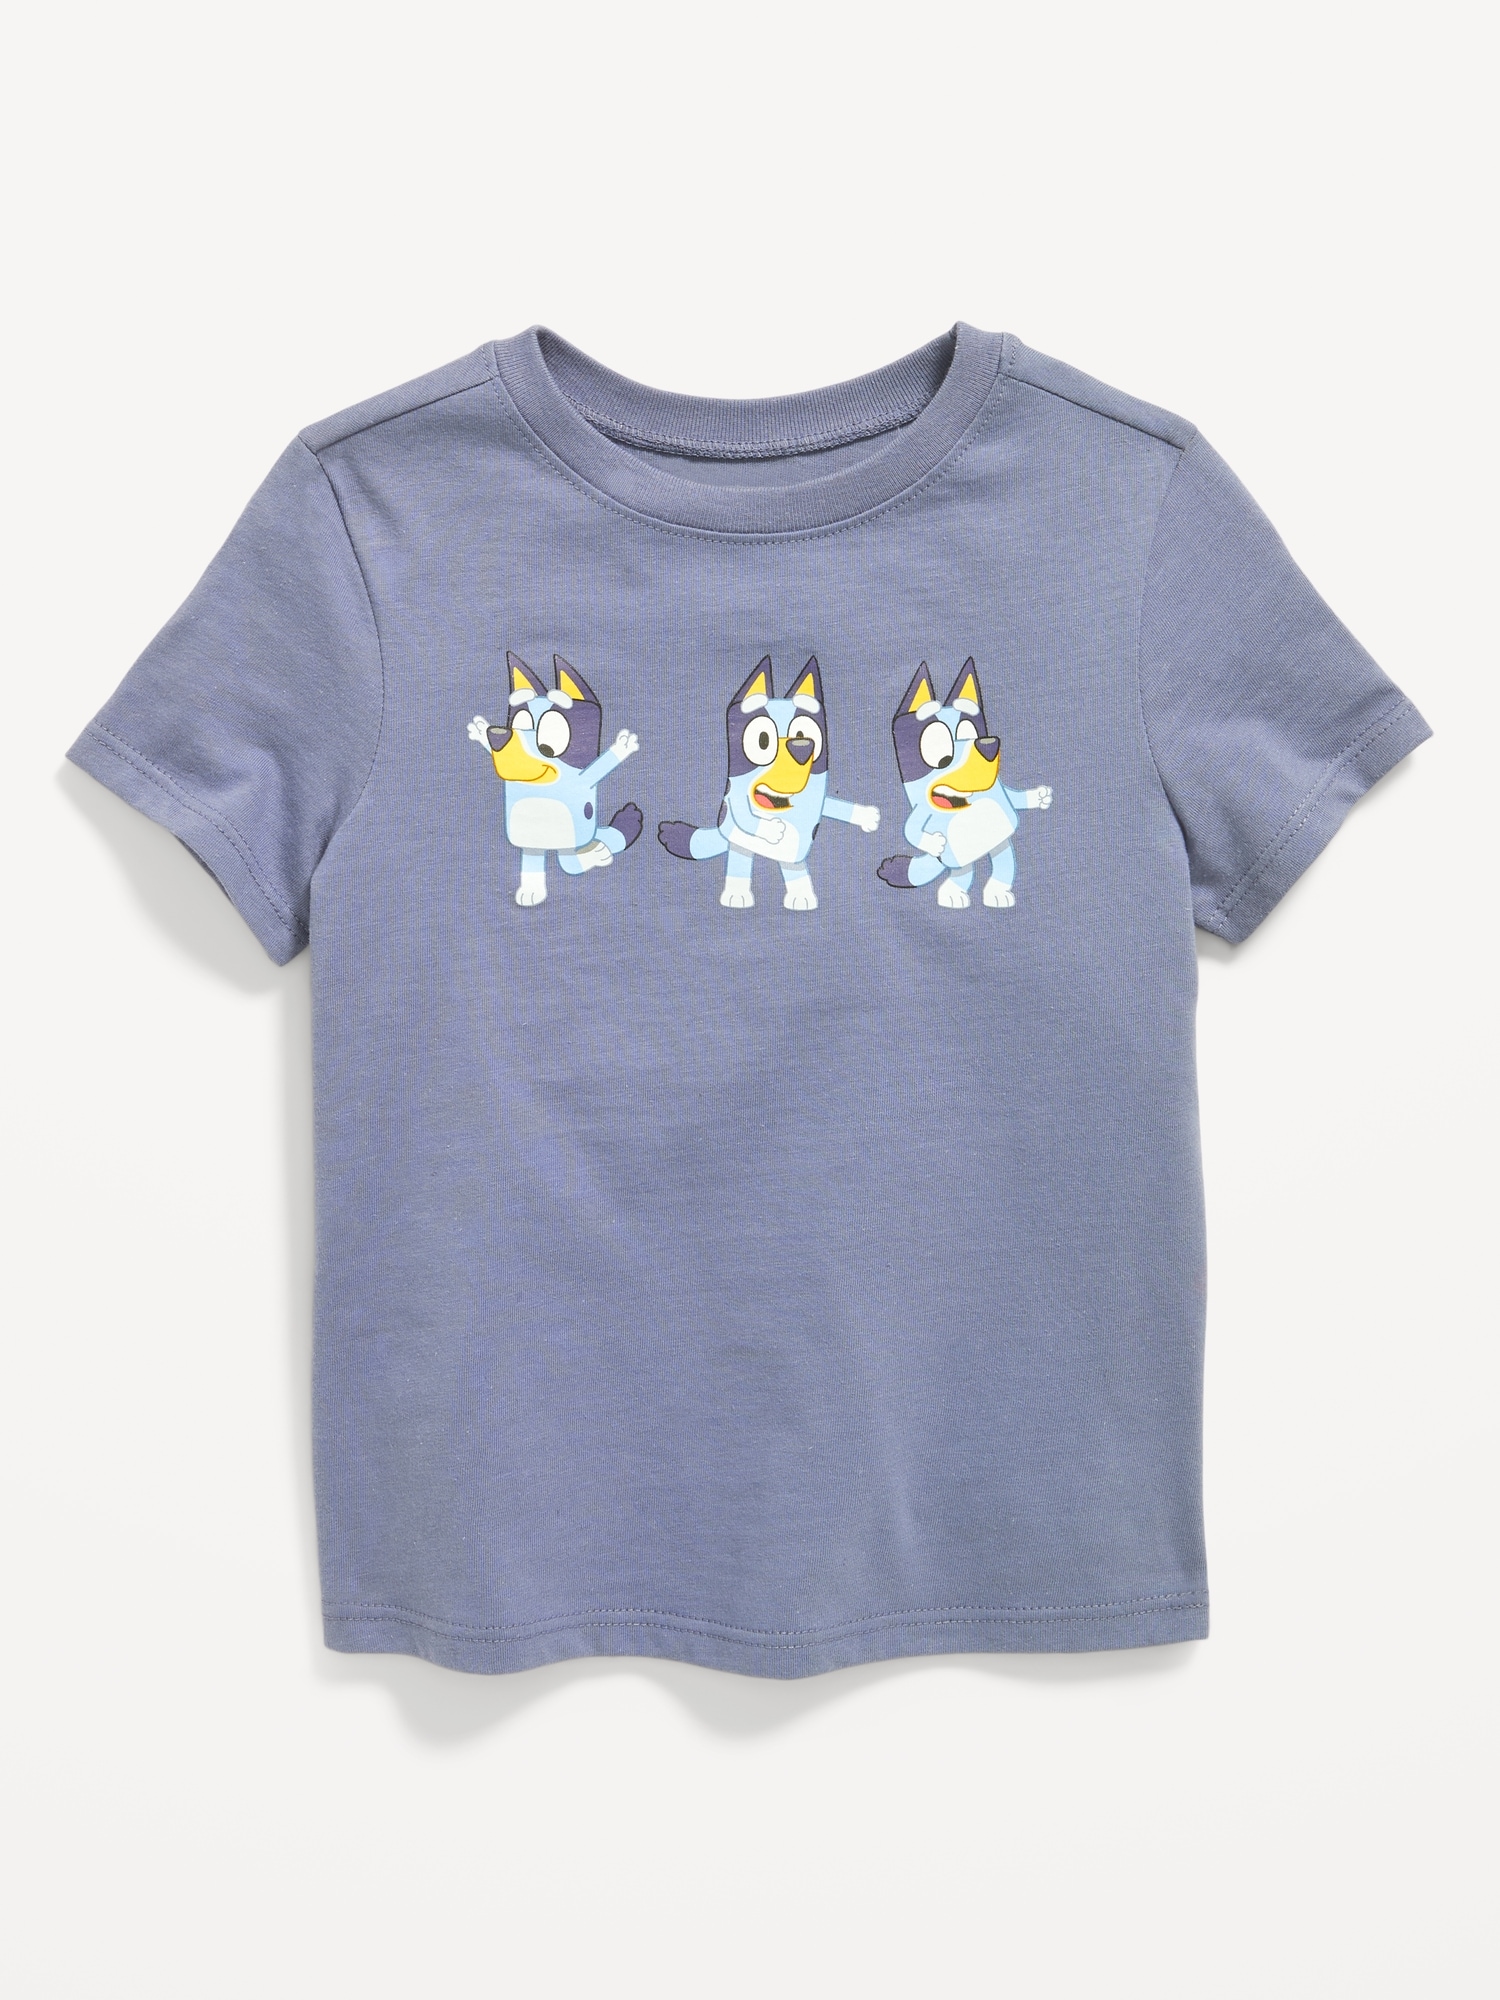 Old Navy Unisex Bluey Graphic T-Shirt 2-Pack for Toddler